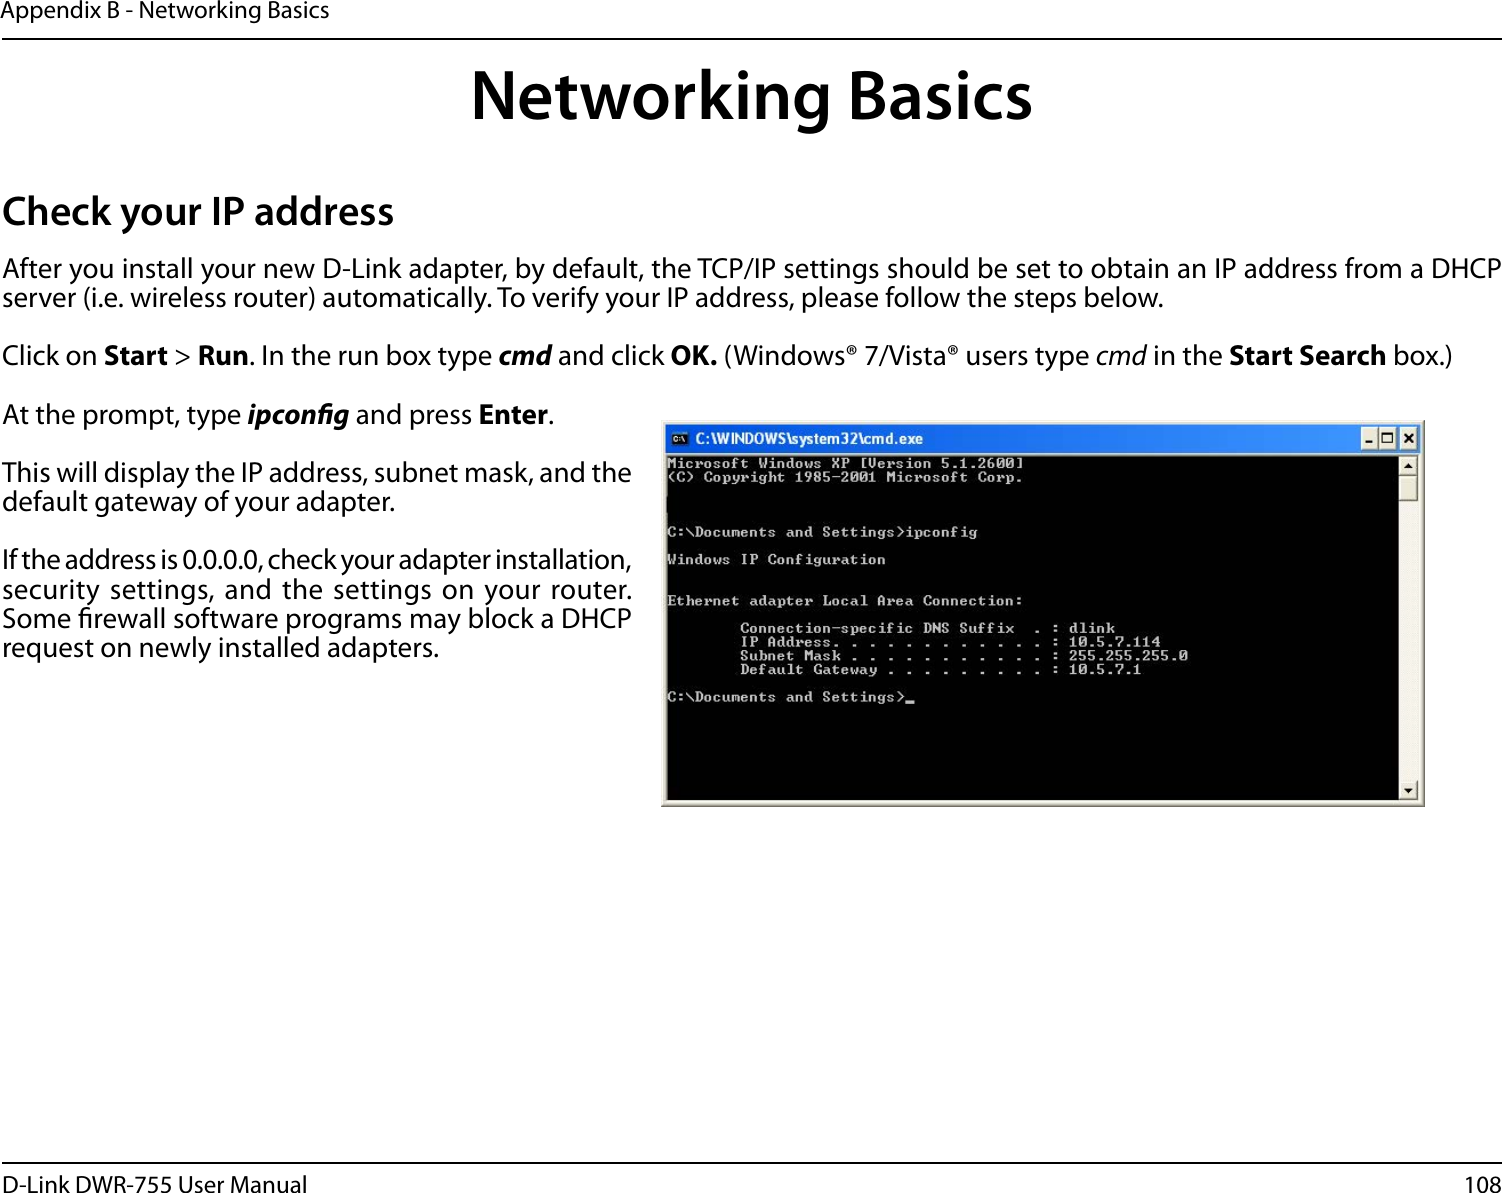 108D-Link DWR-755 User ManualAppendix B - Networking BasicsNetworking BasicsCheck your IP addressAfter you install your new D-Link adapter, by default, the TCP/IP settings should be set to obtain an IP address from a DHCP server (i.e. wireless router) automatically. To verify your IP address, please follow the steps below.Click on Start &gt; Run. In the run box type cmd and click OK. (Windows® 7/Vista® users type cmd in the Start Search box.)At the prompt, type ipcong and press Enter.This will display the IP address, subnet mask, and the default gateway of your adapter.If the address is 0.0.0.0, check your adapter installation, security settings, and the settings on your router. Some rewall software programs may block a DHCP request on newly installed adapters. 